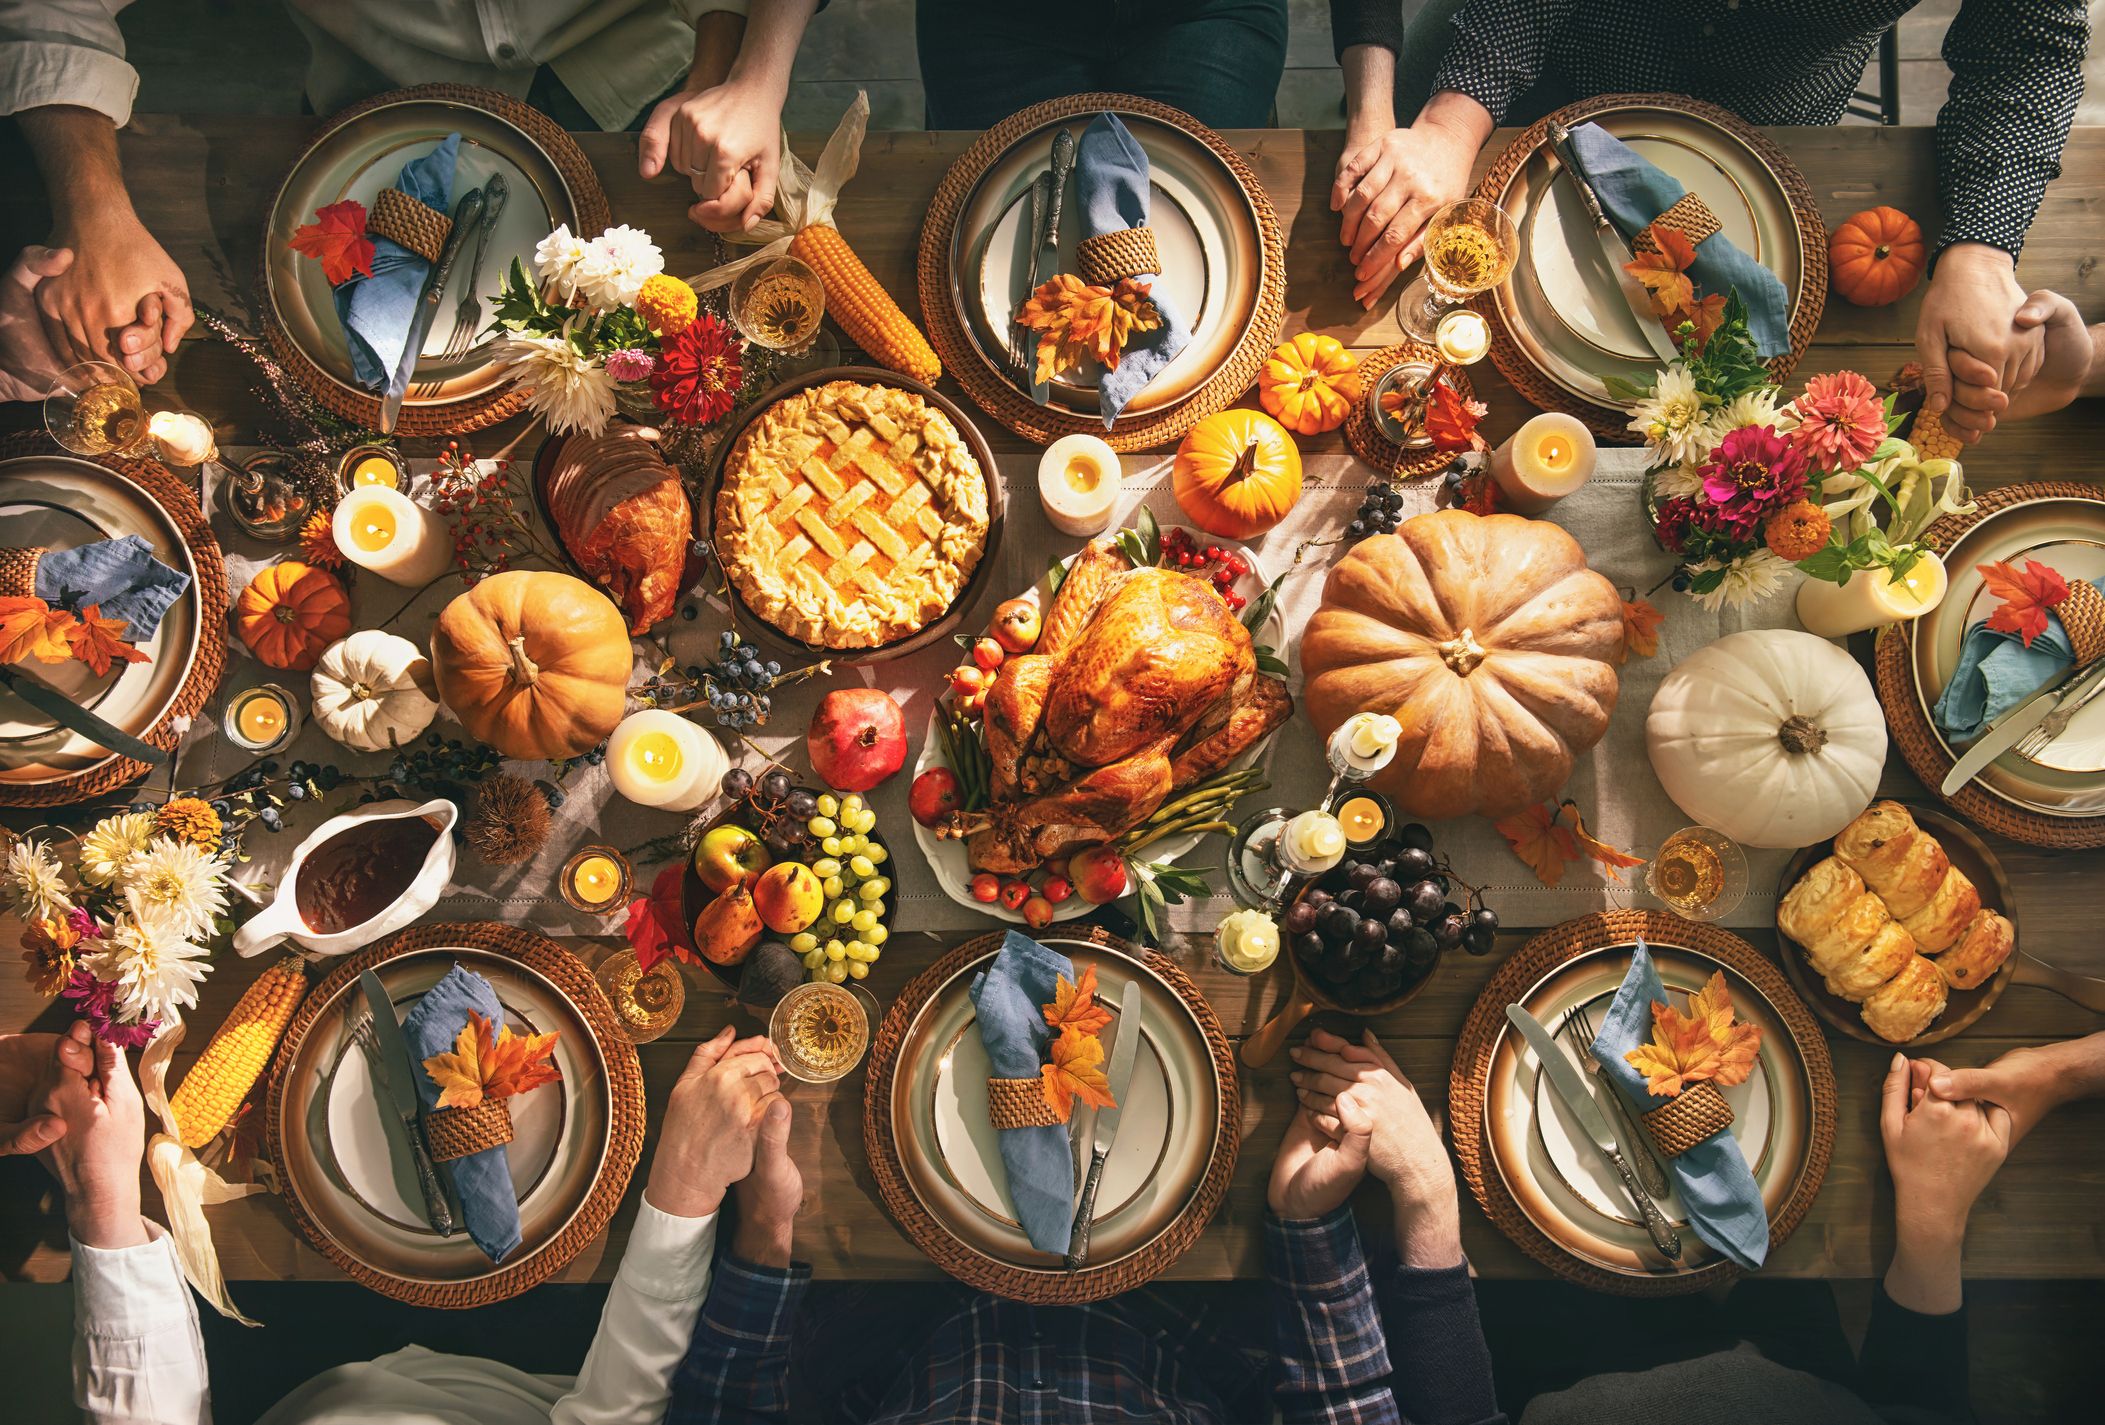 10 Tips for Having a Happy Thanksgiving 2023